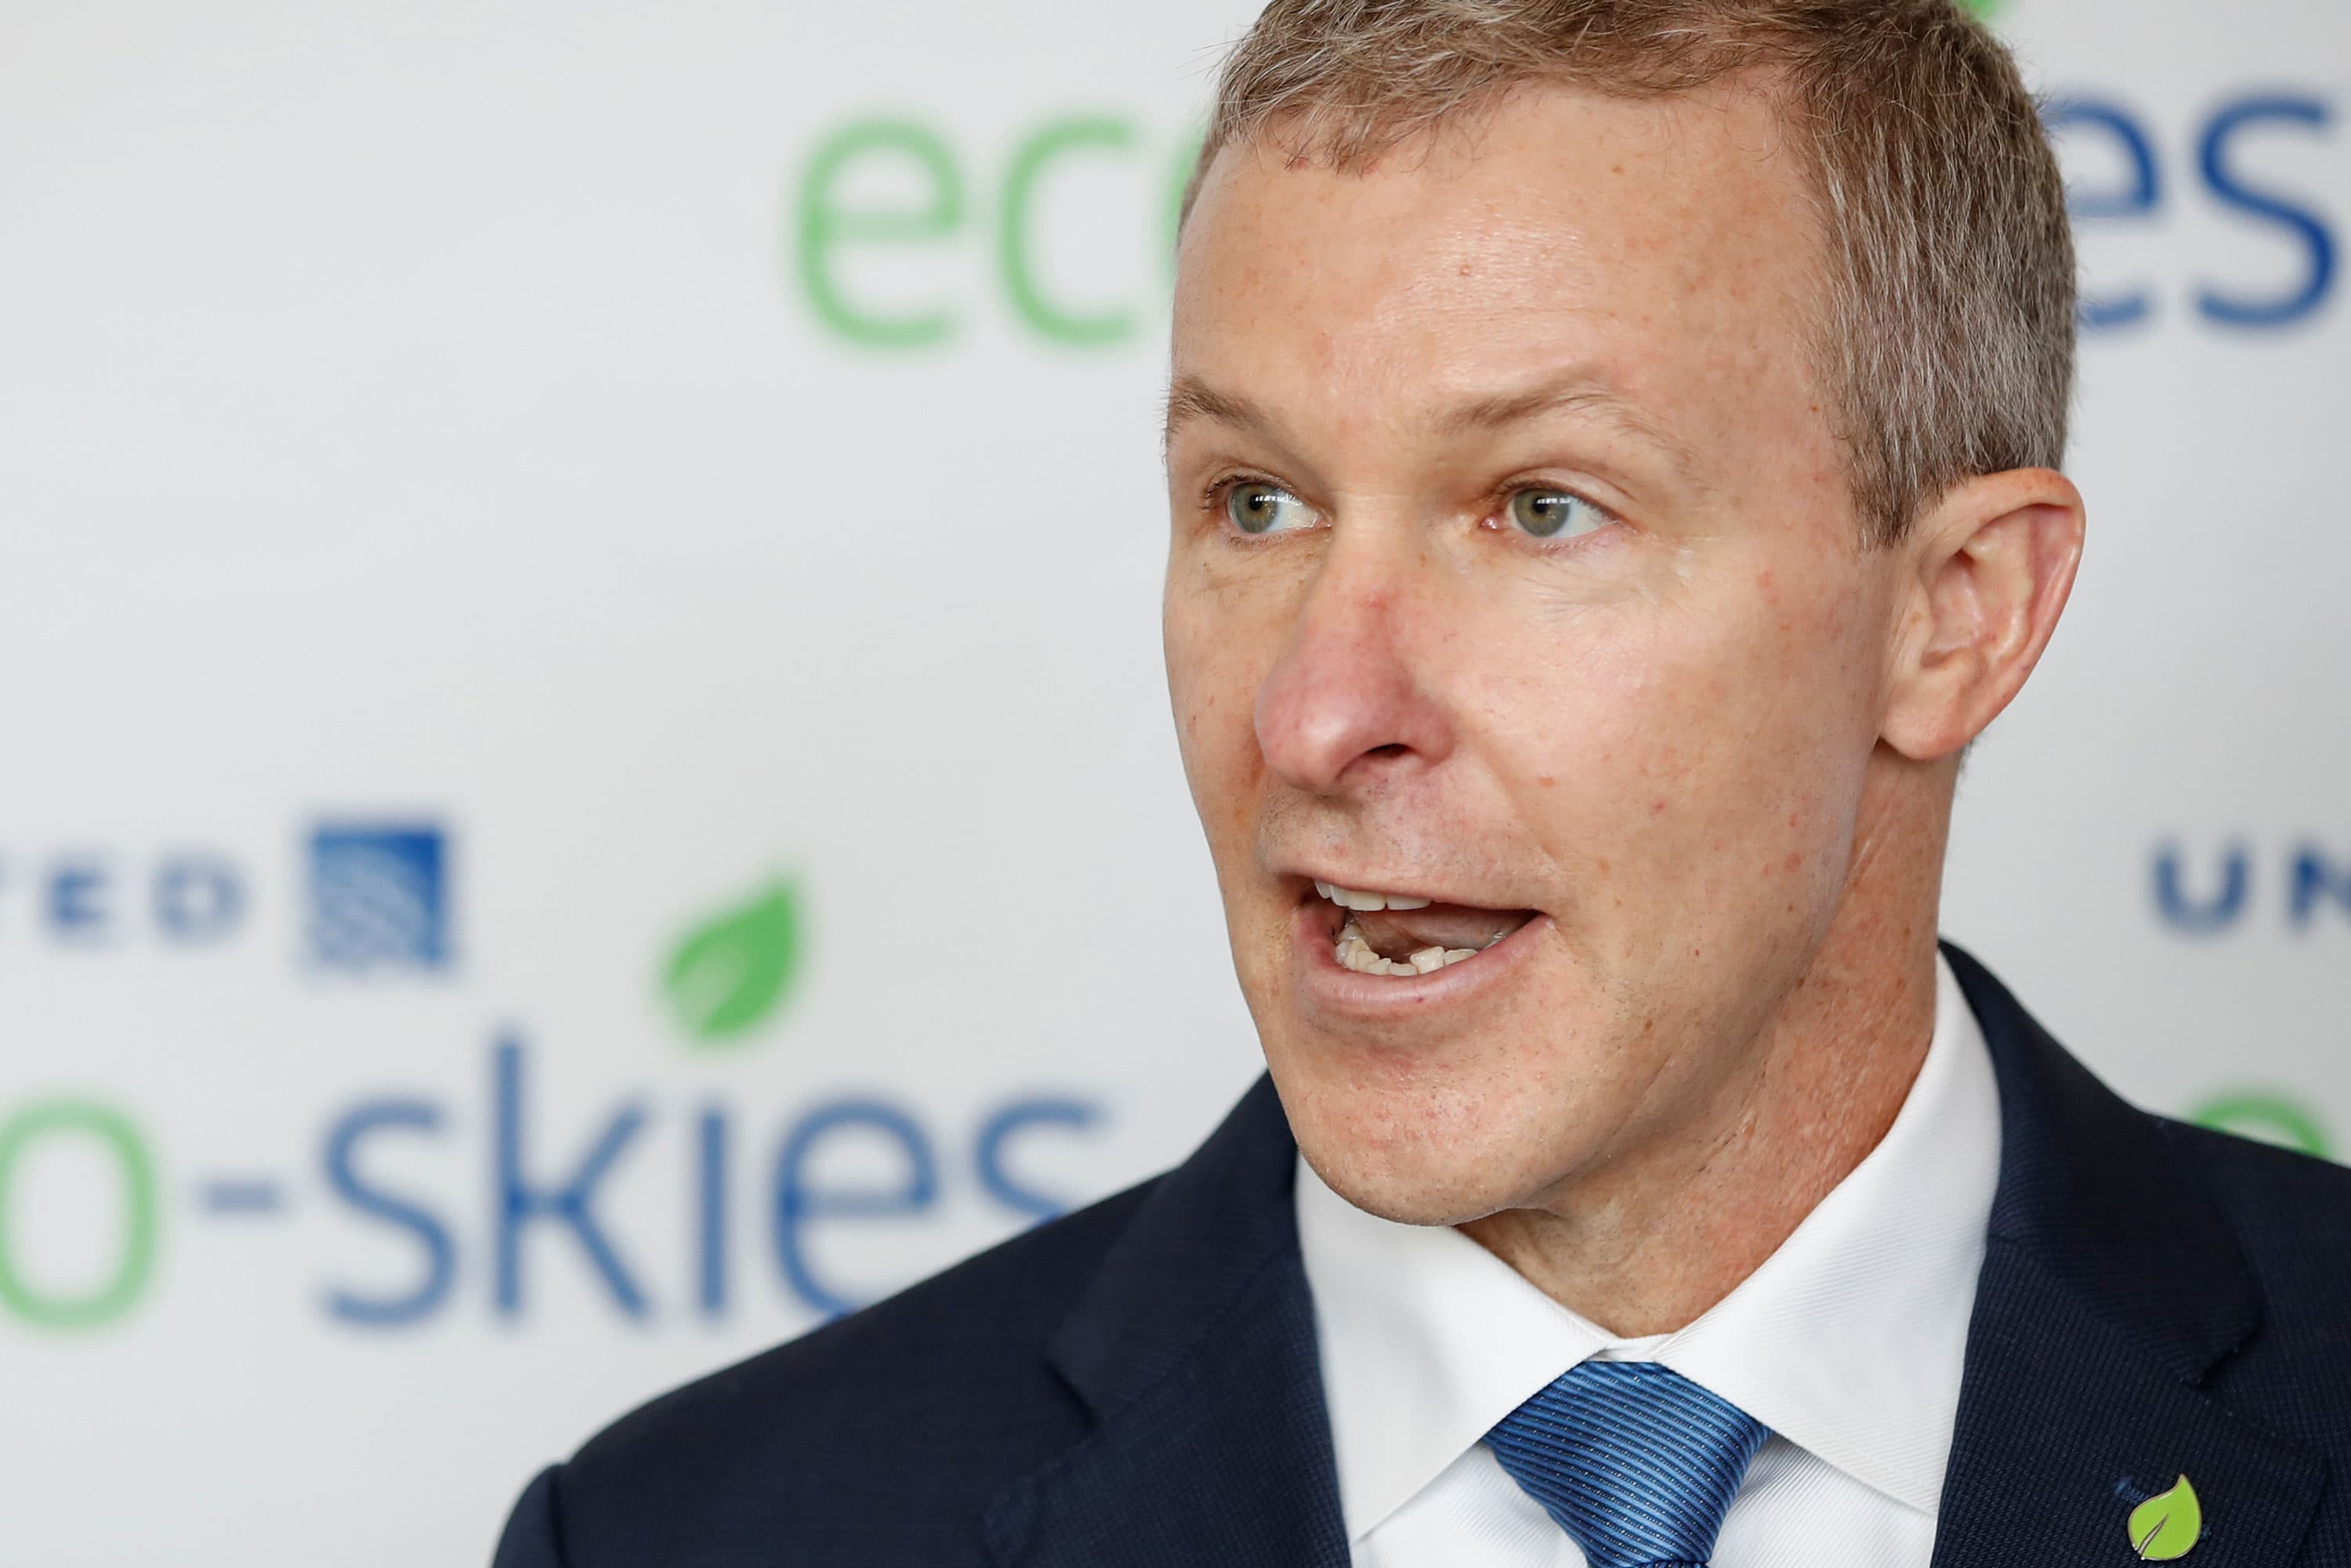 United Airlines' new CEO Scott Kirby vows to get through coronavirus 'hell'